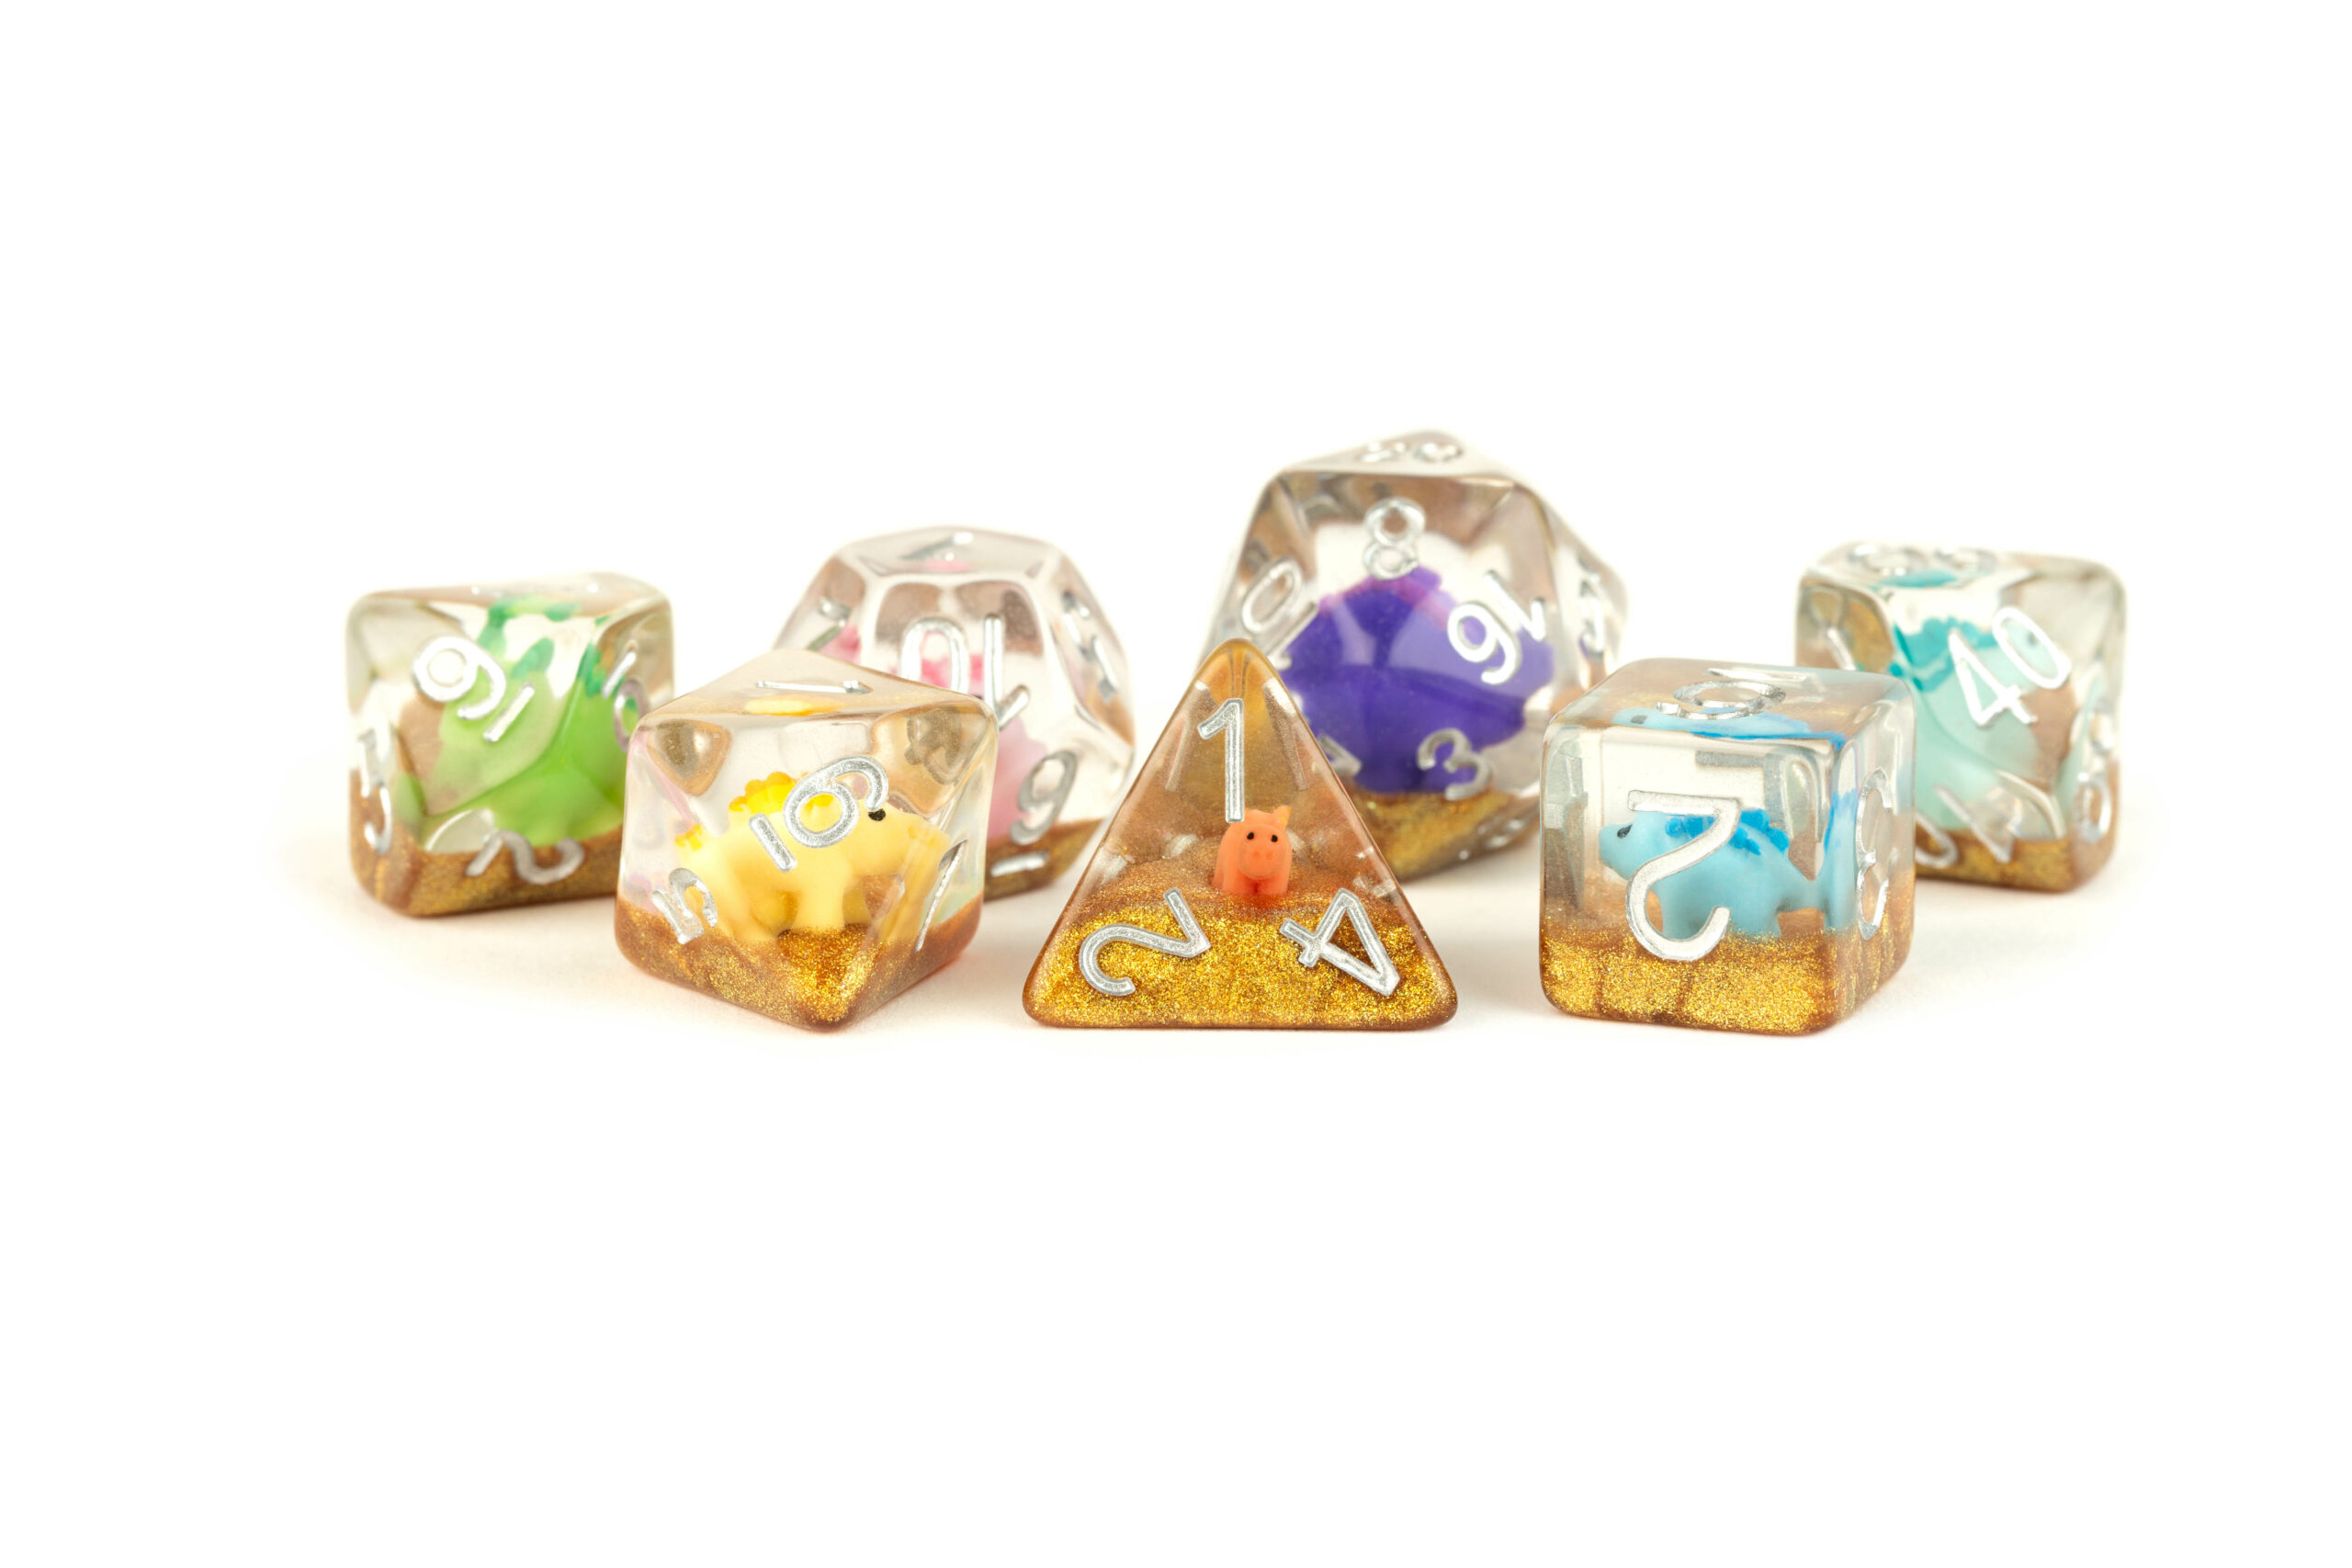 16mm Resin Poly Dice Set that has Rainbow Dinosaur figures with gold sand at the bottom and silver lettering